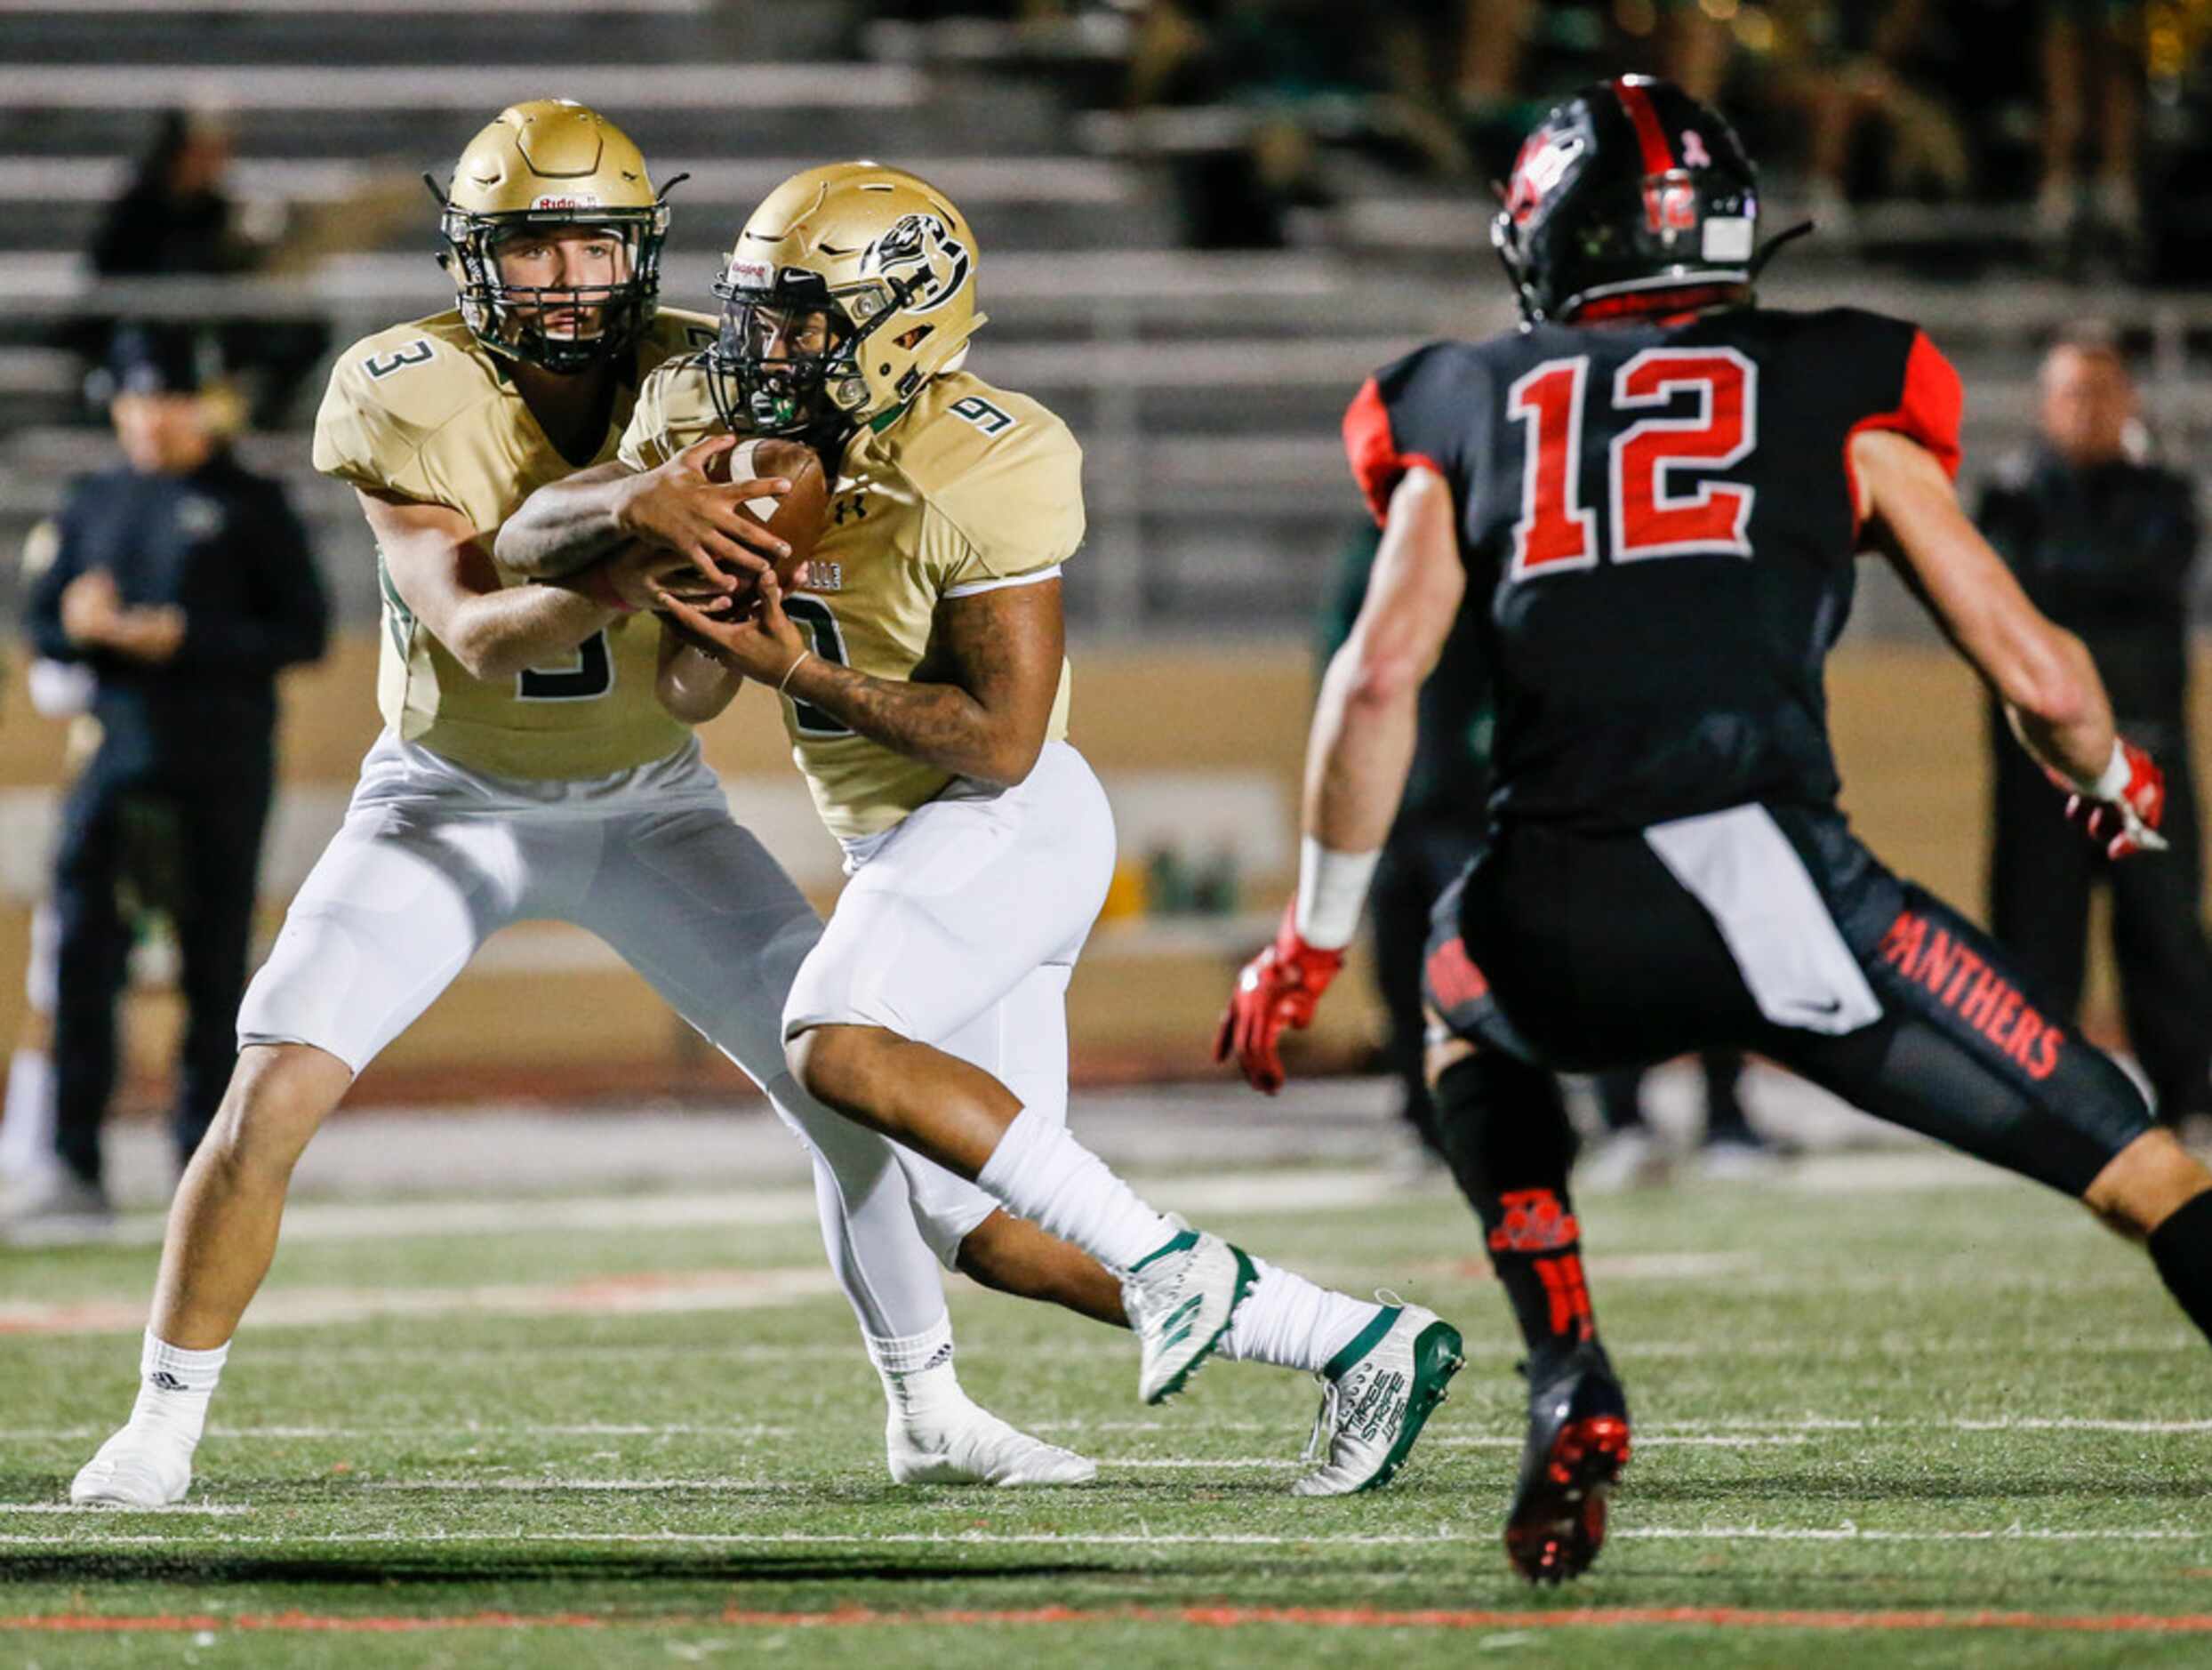 Birdville quarterback Stone Earle (3) hands off to running back Laderrious Mixon (9) as they...